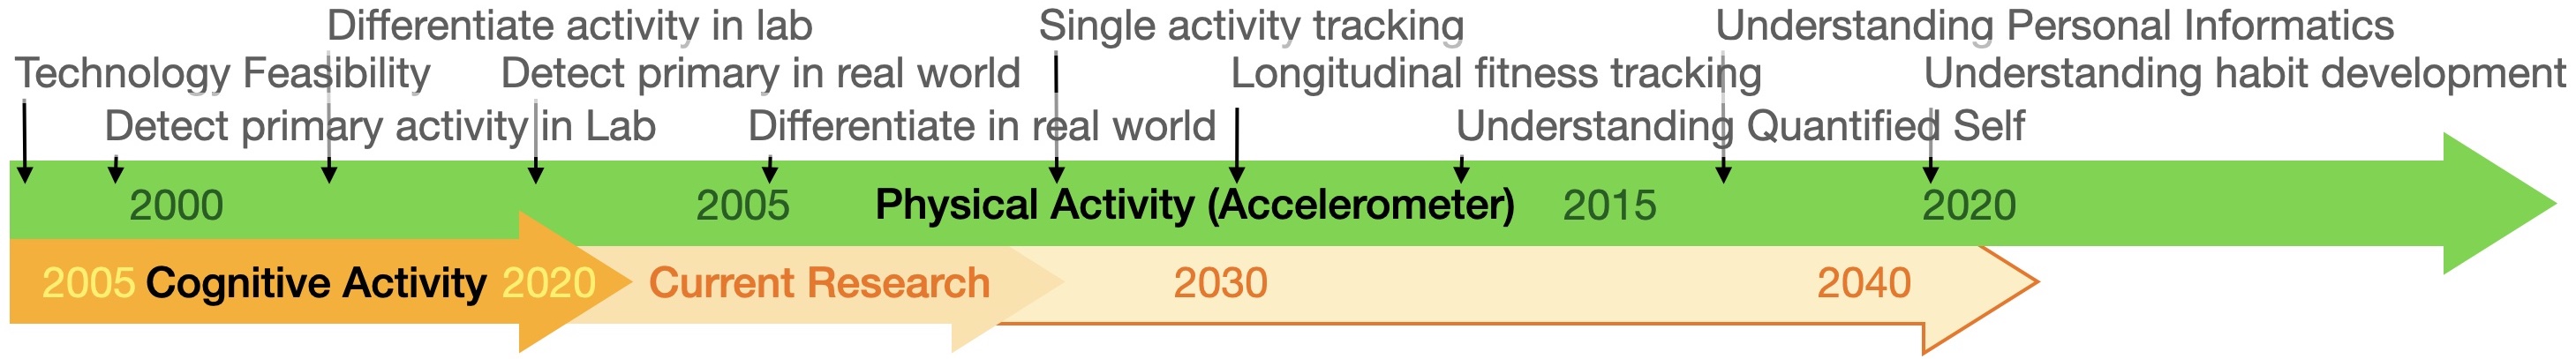 Timeline showing the progress of cognitive activity tracking compared to physical activity tracking. Cognitive activity tracking is currently where physical activity tracking was in around 2005.